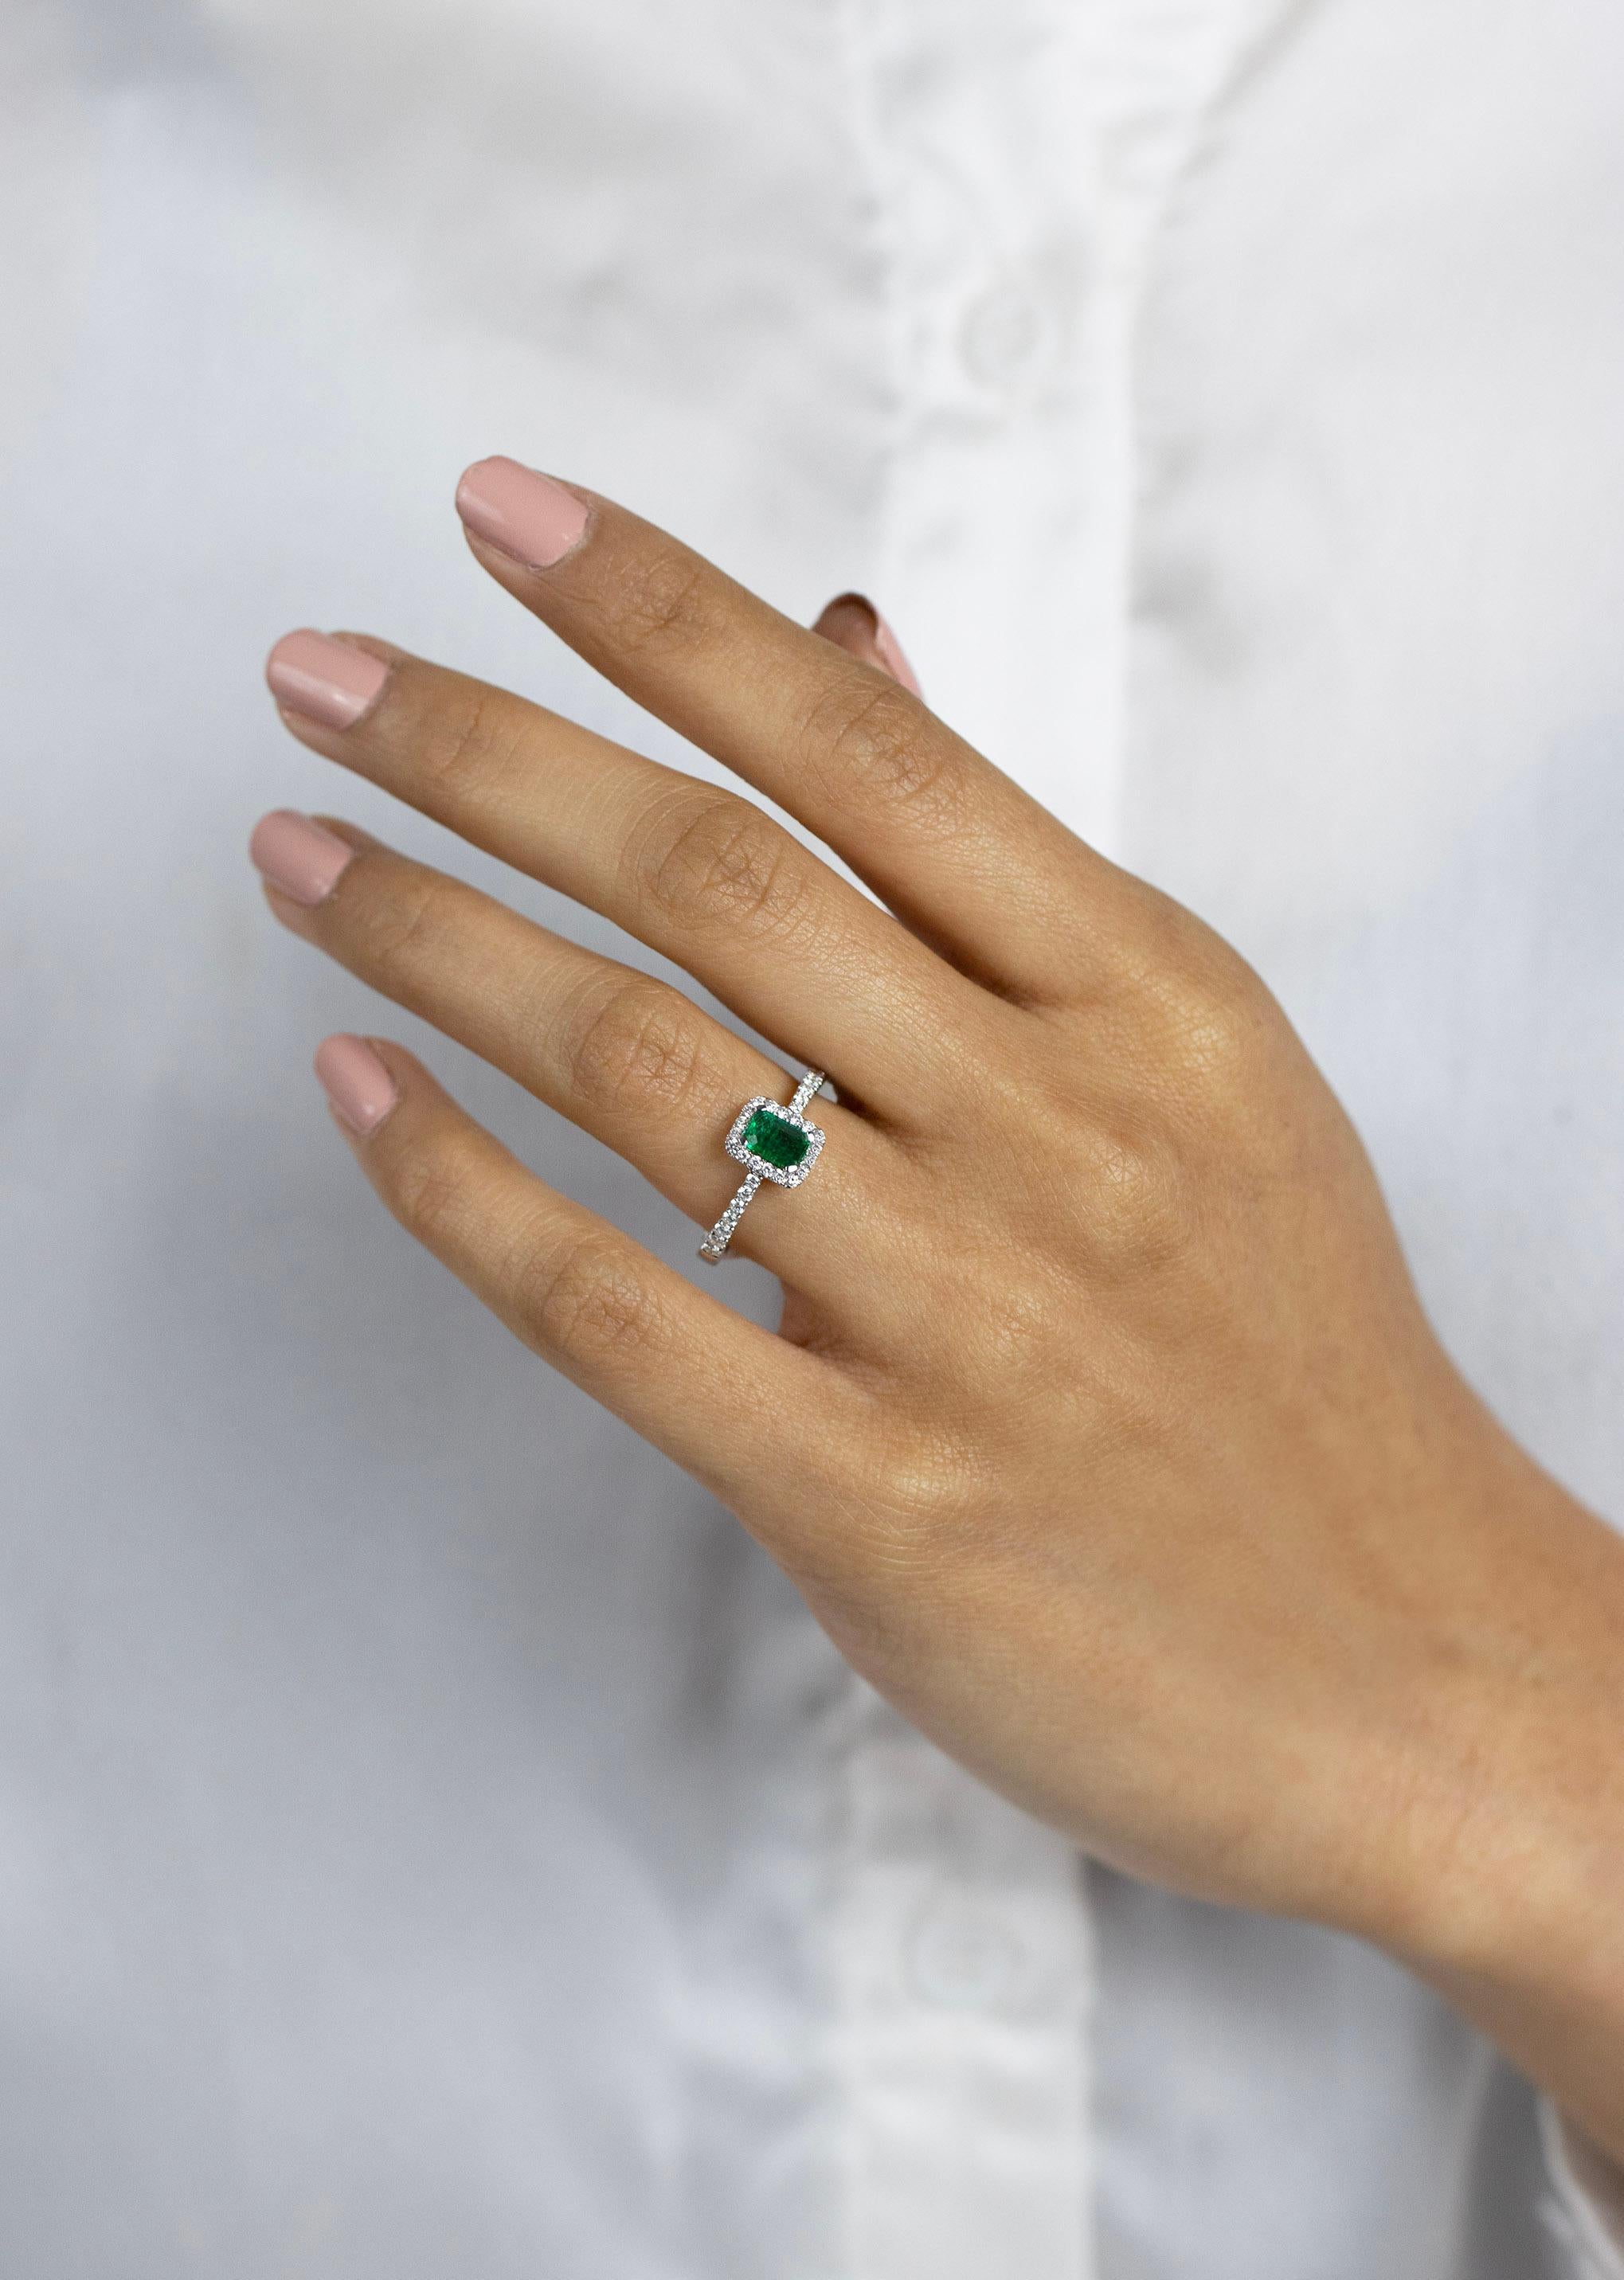 0.49 Carats Total Emerald Cut Green Emerald & Diamond Halo Engagement Ring For Sale 1